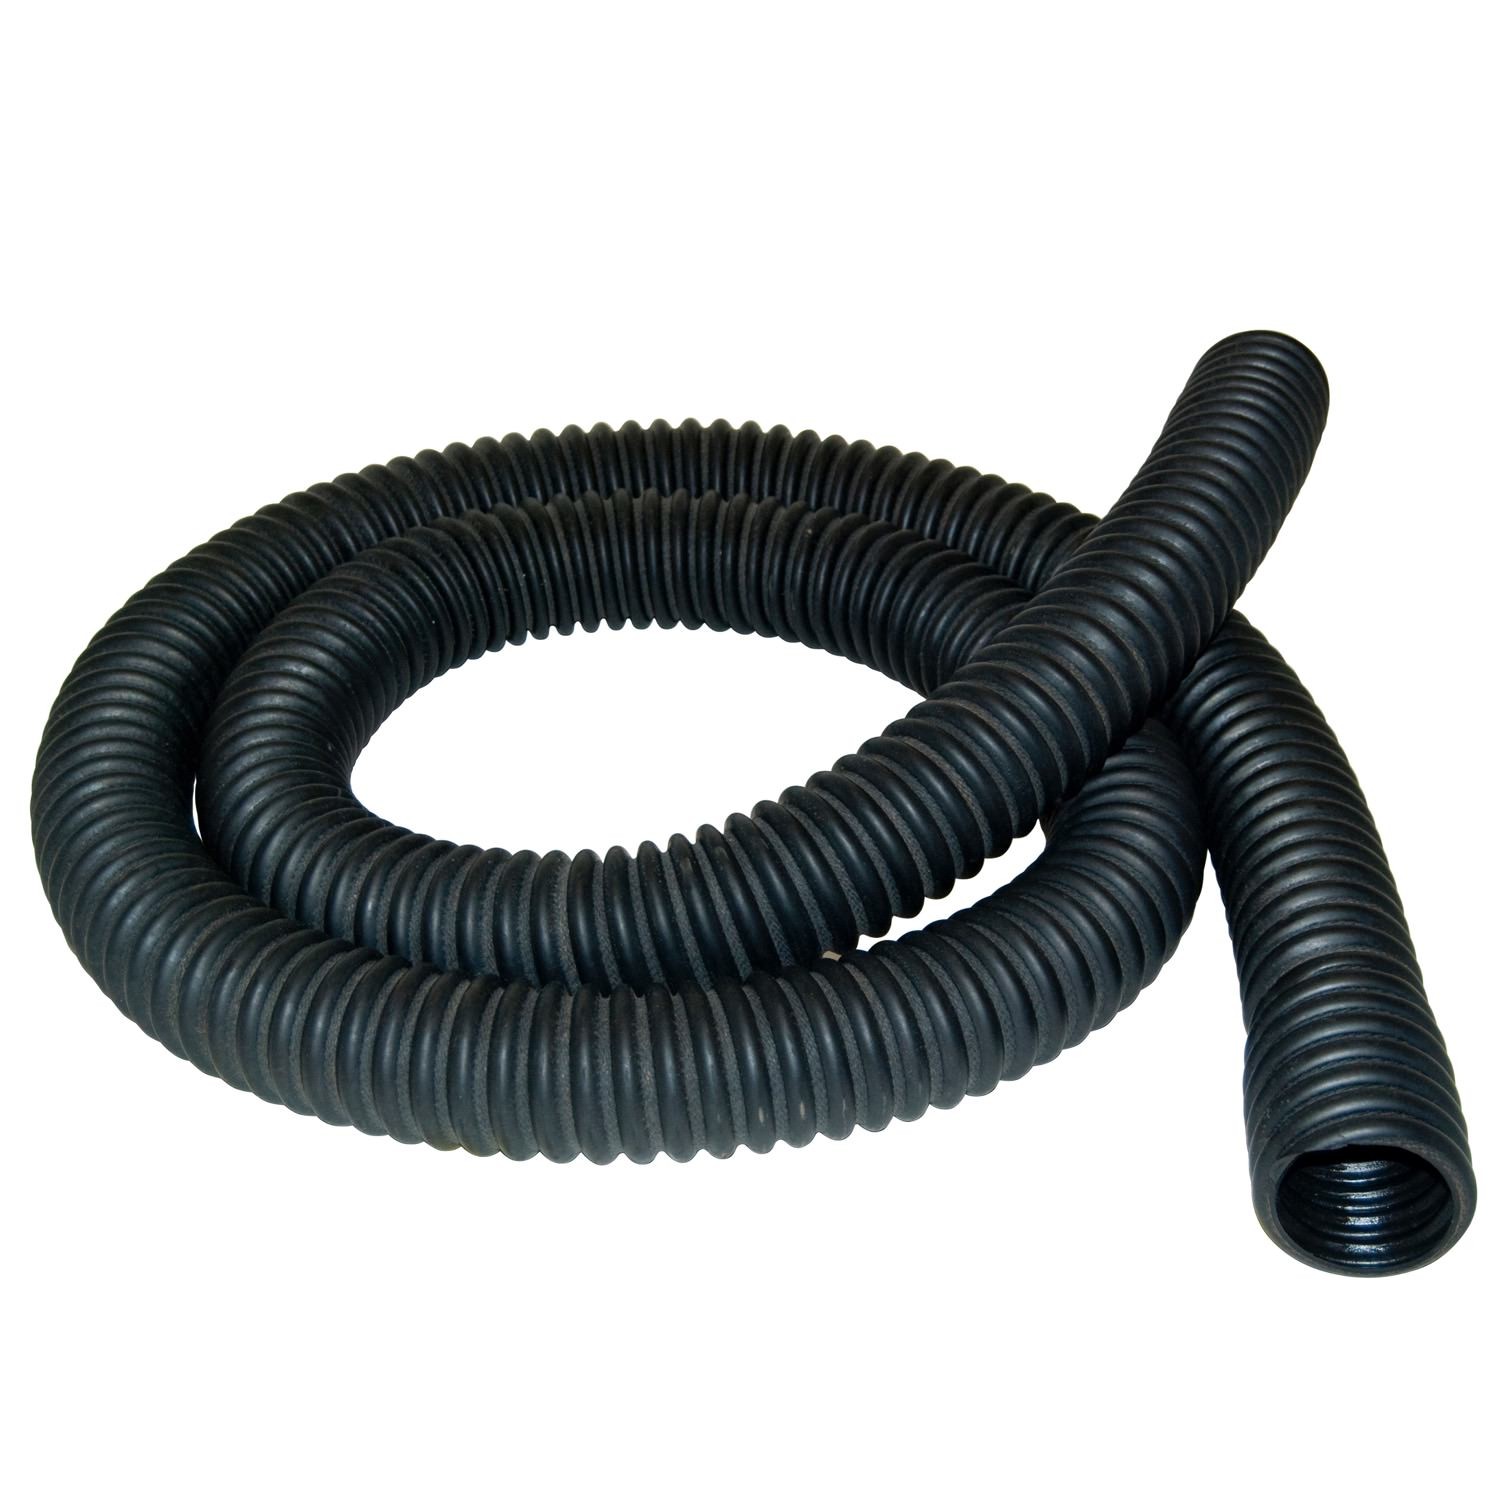 Crush Proof Hoses and Accessories